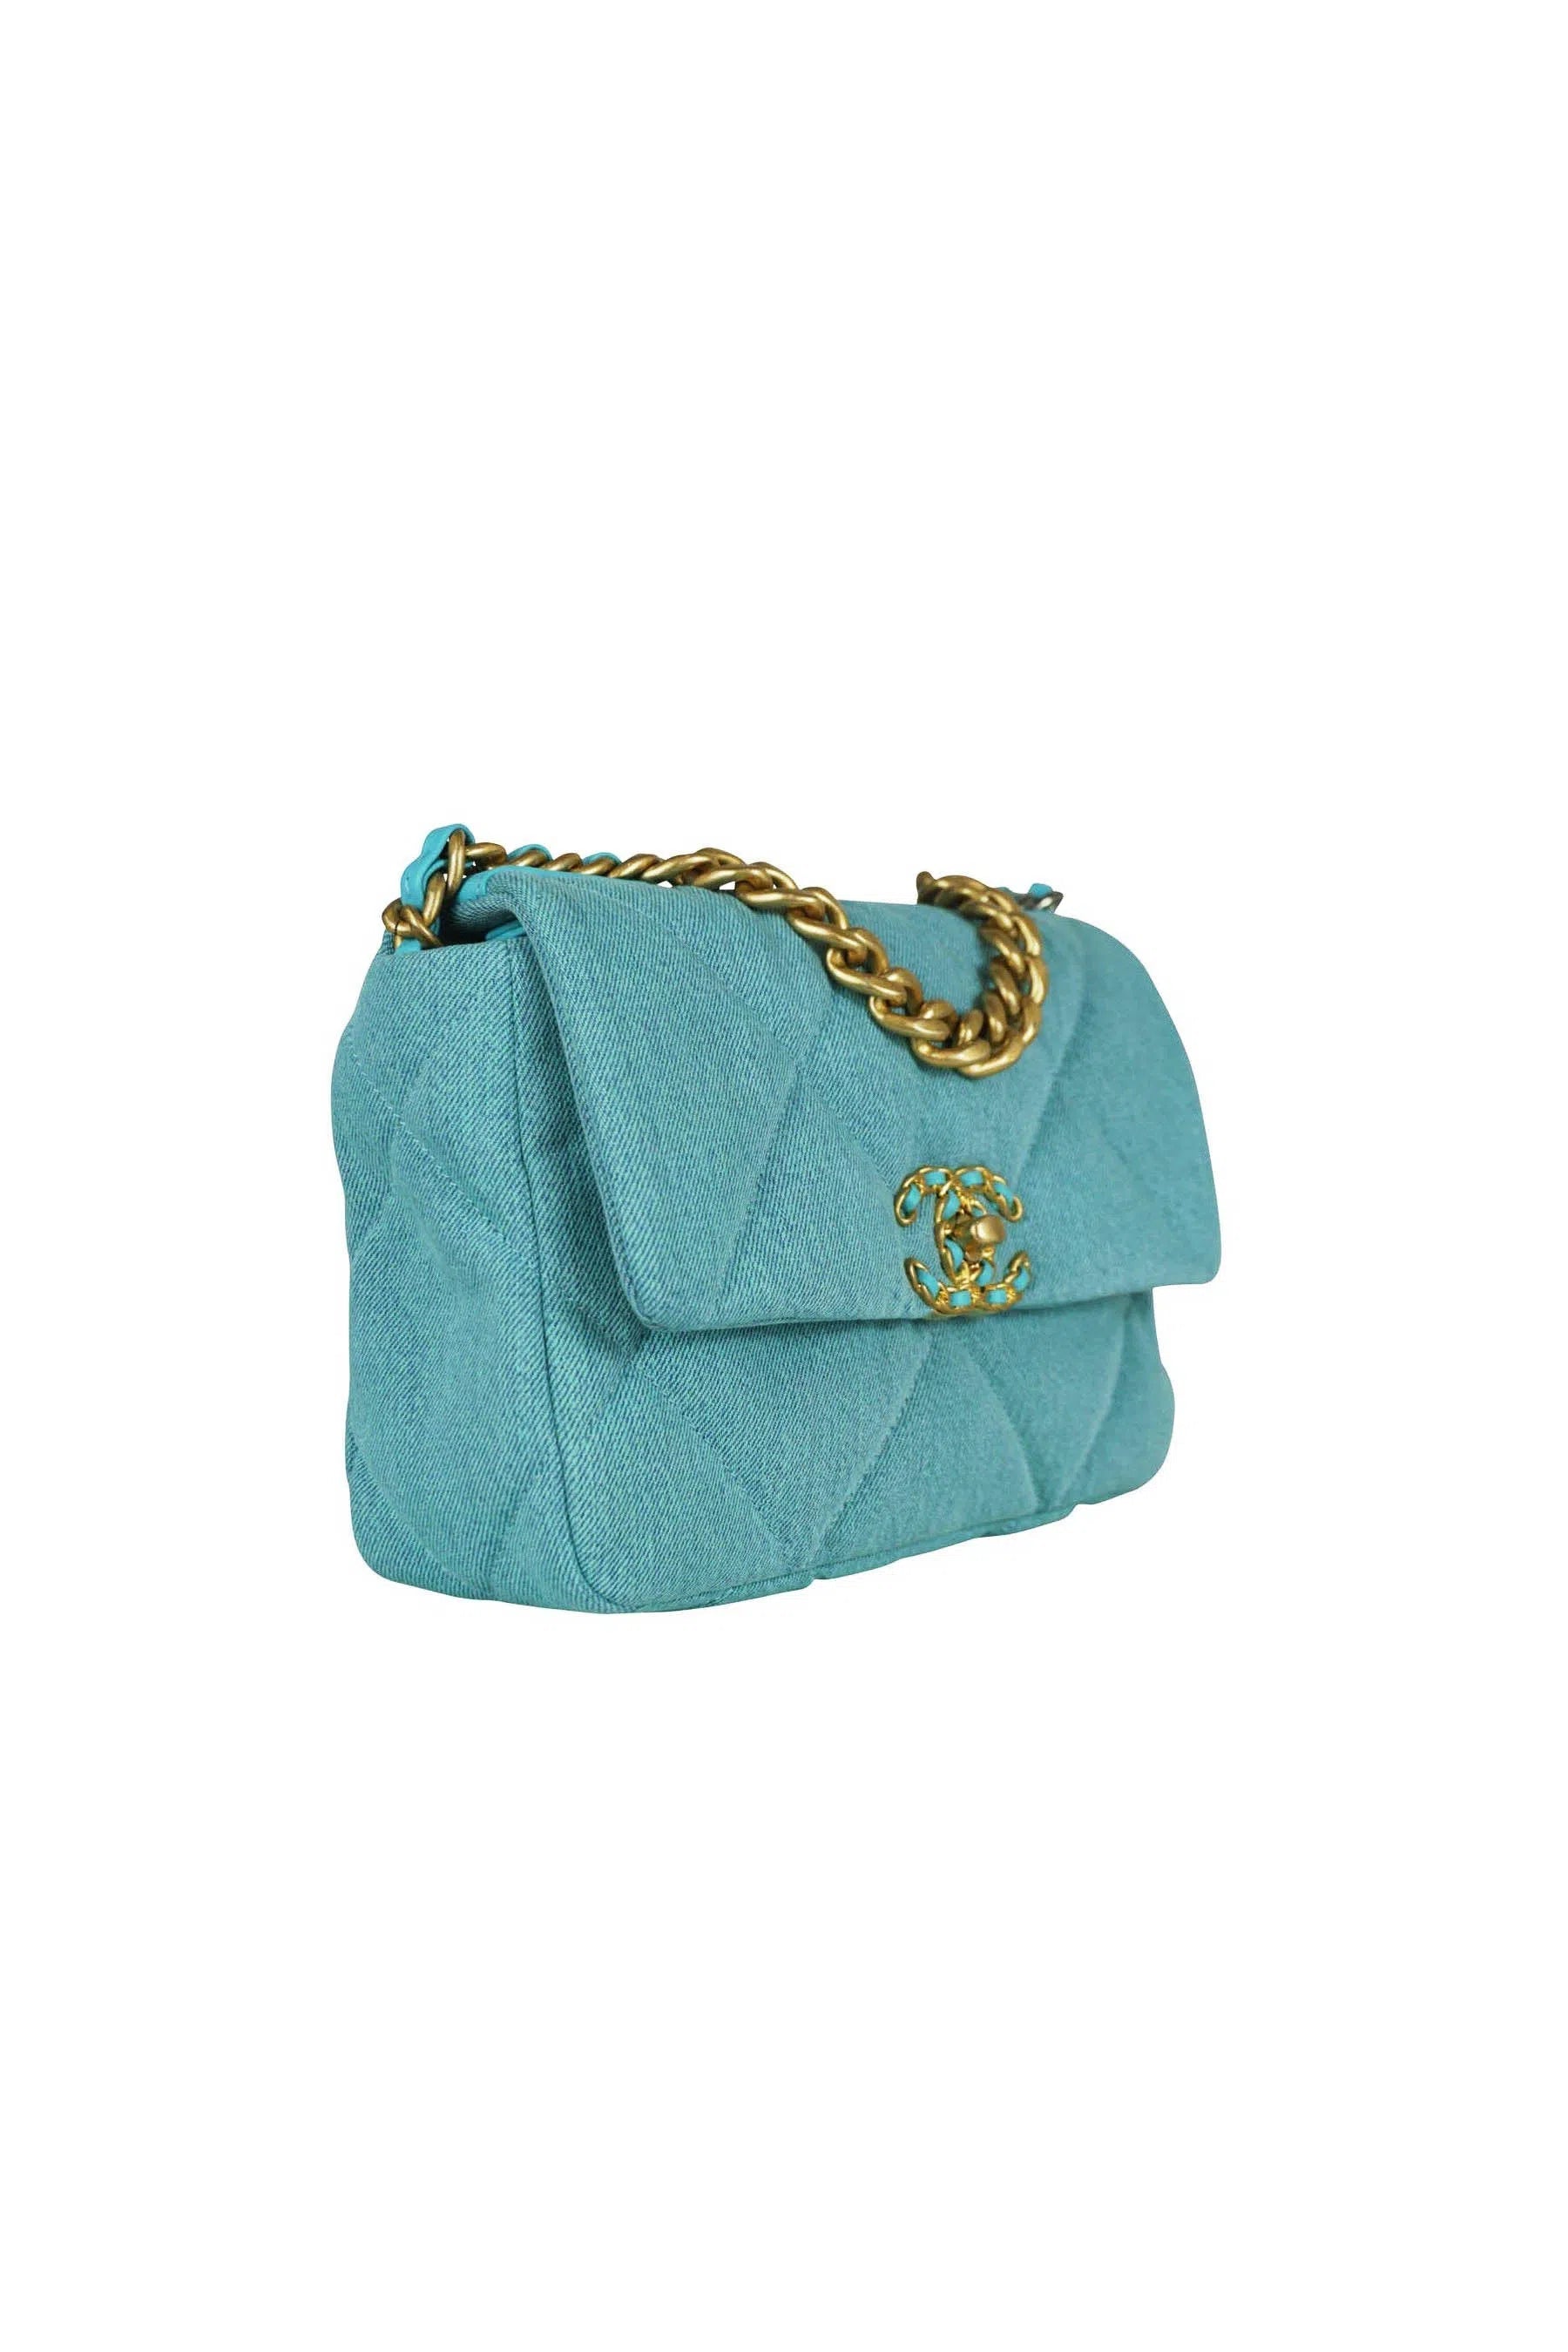 Chanel 19 Turquoise and Denim Purse Medium - Foxy Couture Carmel